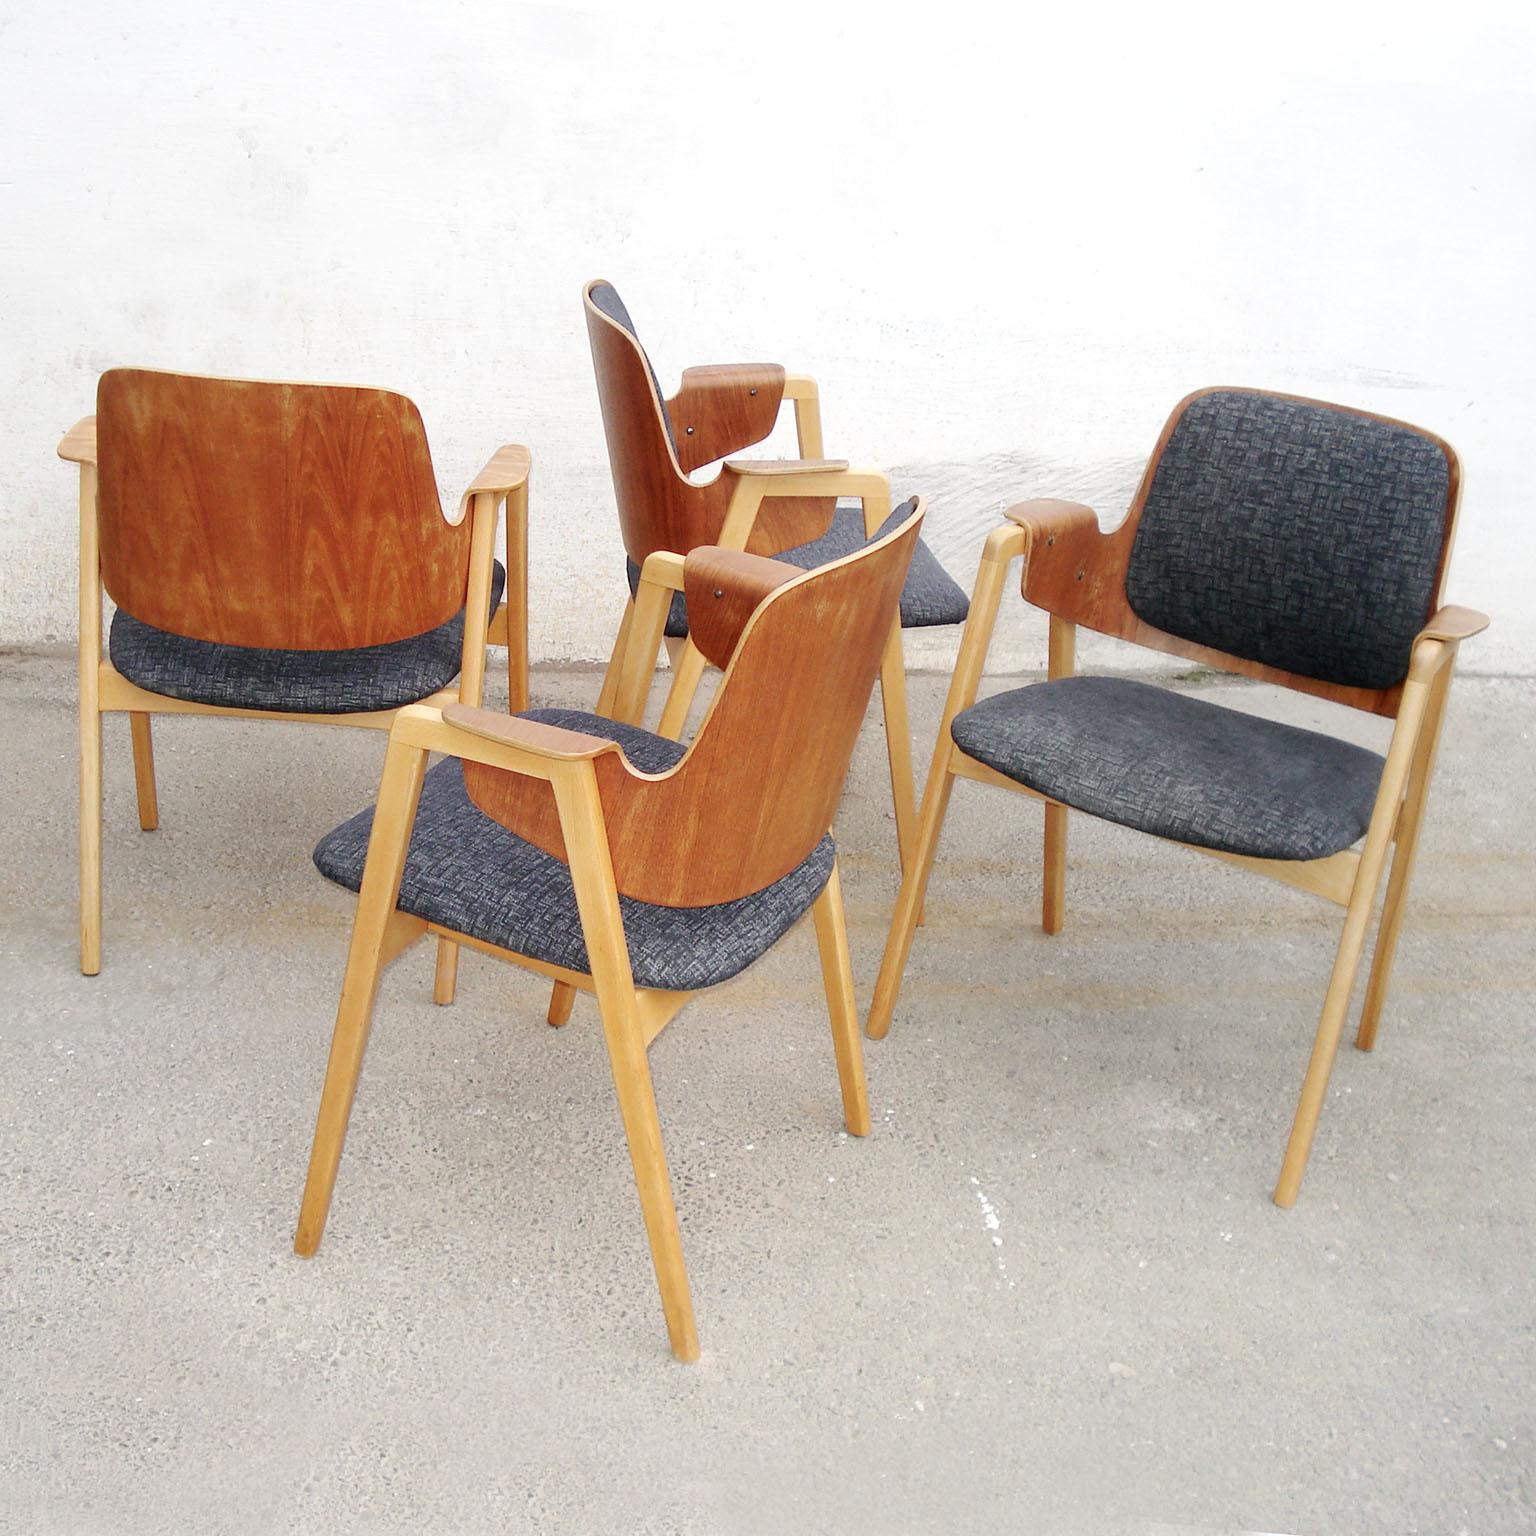 Mid-20th Century Set of 4 Elias Barup Teak Dining Chairs with Original Upholstery, 1950s Sweden For Sale